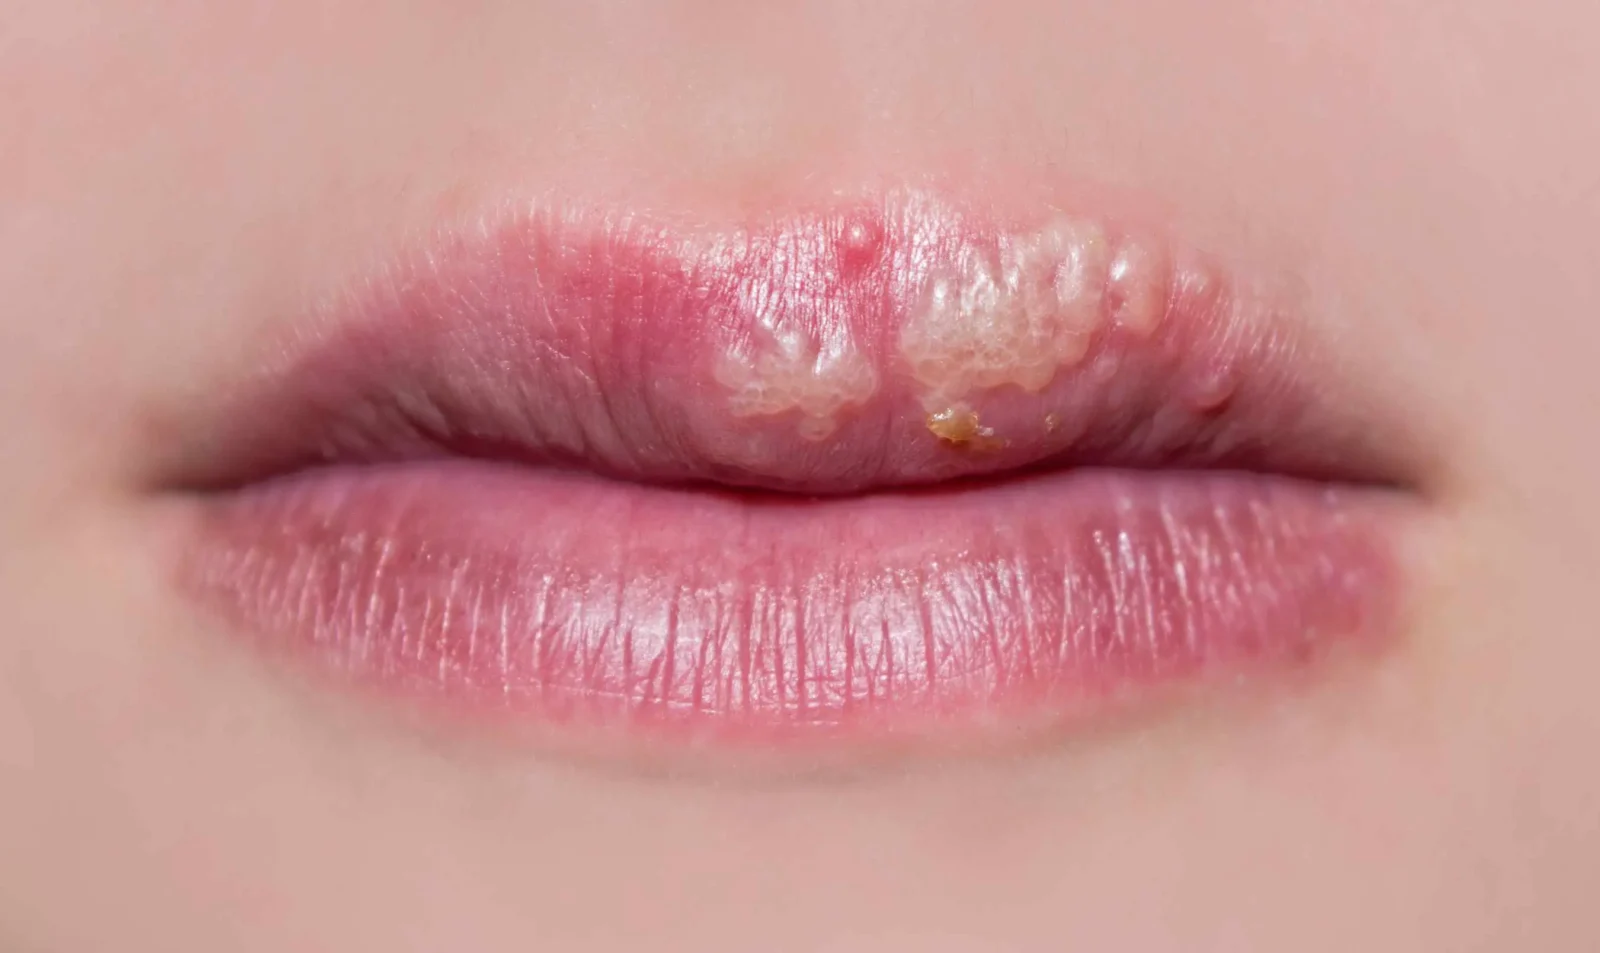 Effective Remedies for Cold Sores: Heal and Prevent Outbreaks